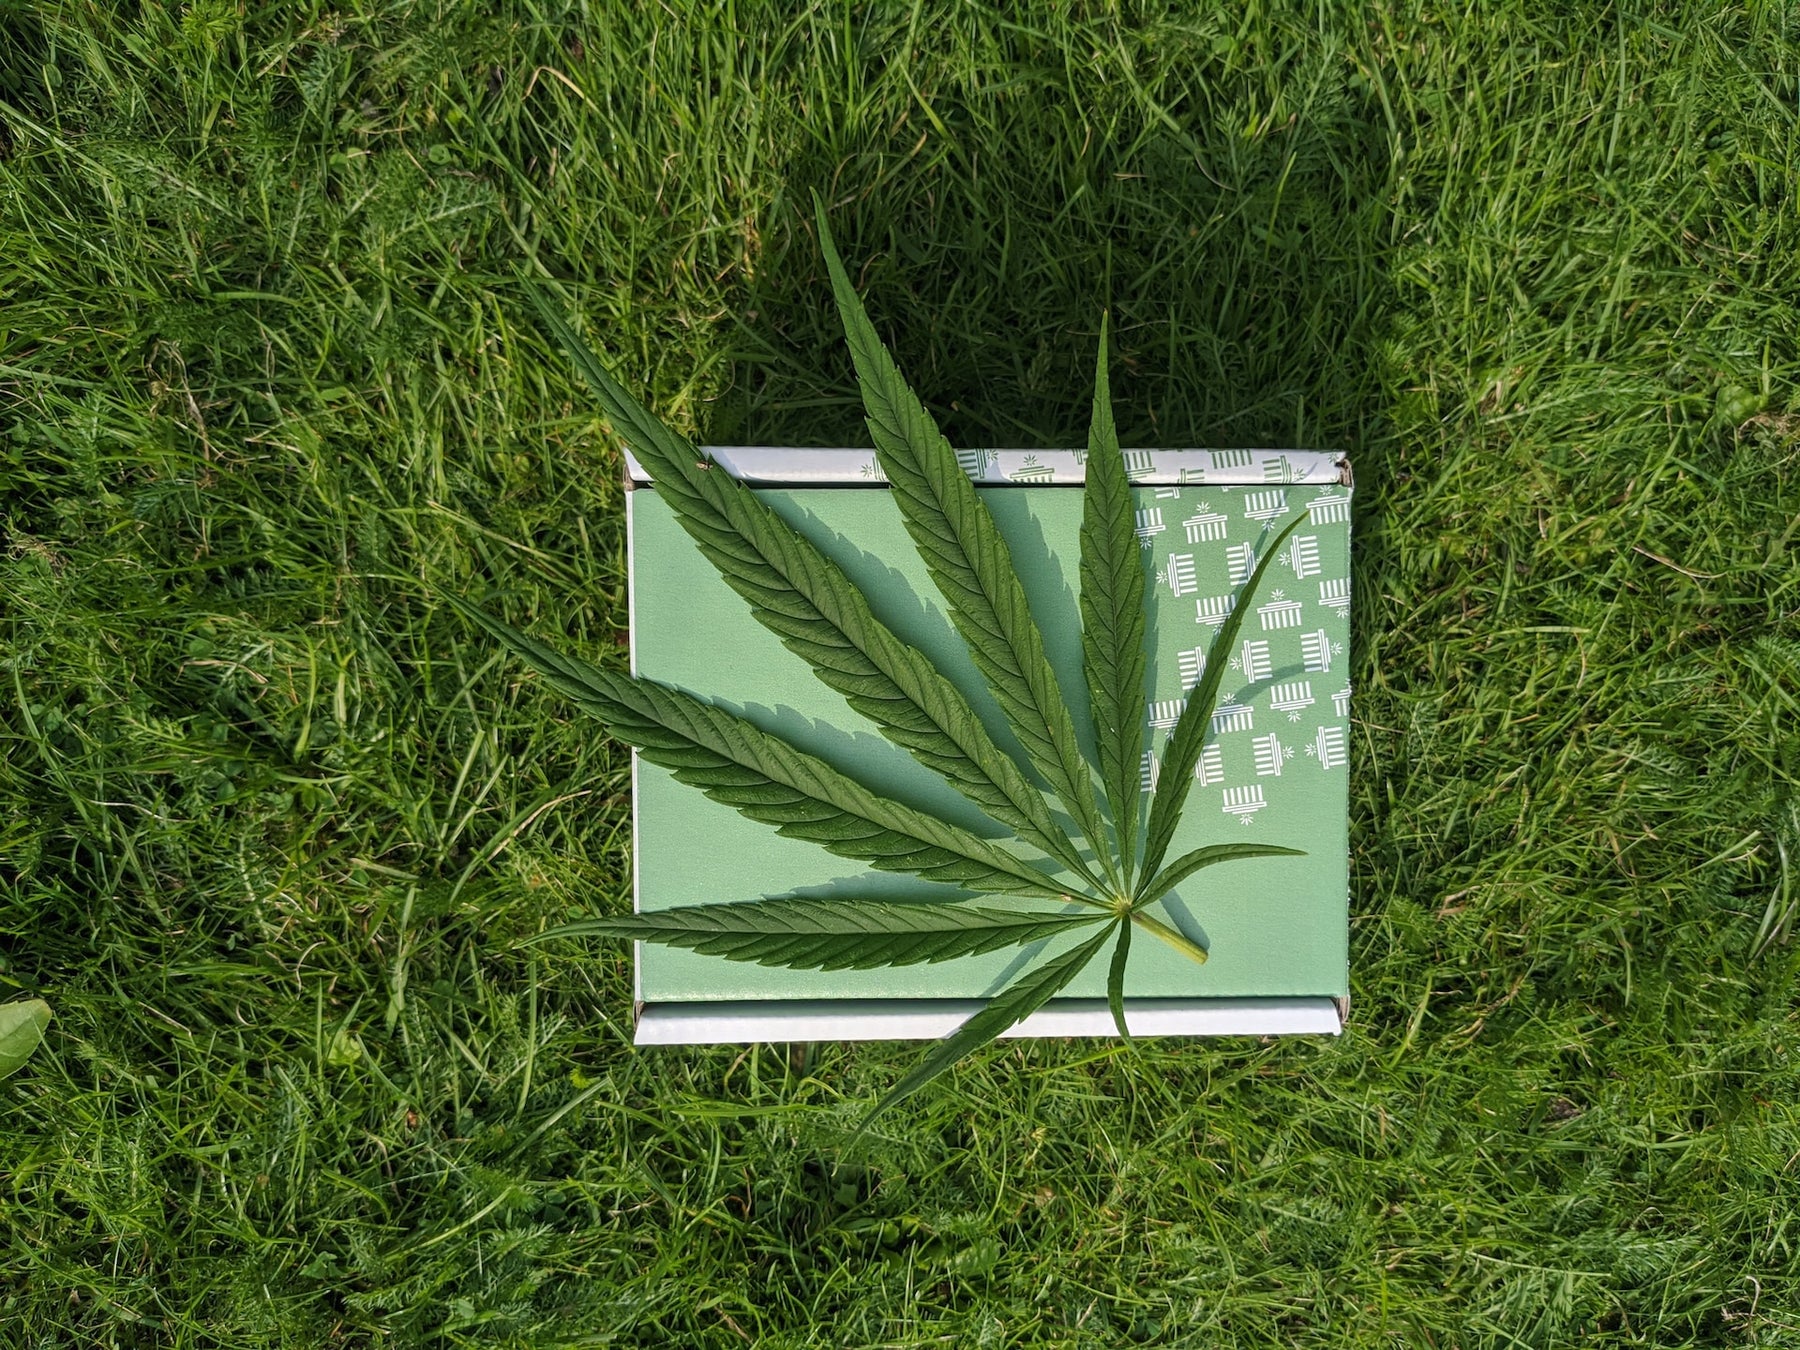 Summer Breeze & Cannabis Bliss: Savoring the Last of the Warm Days